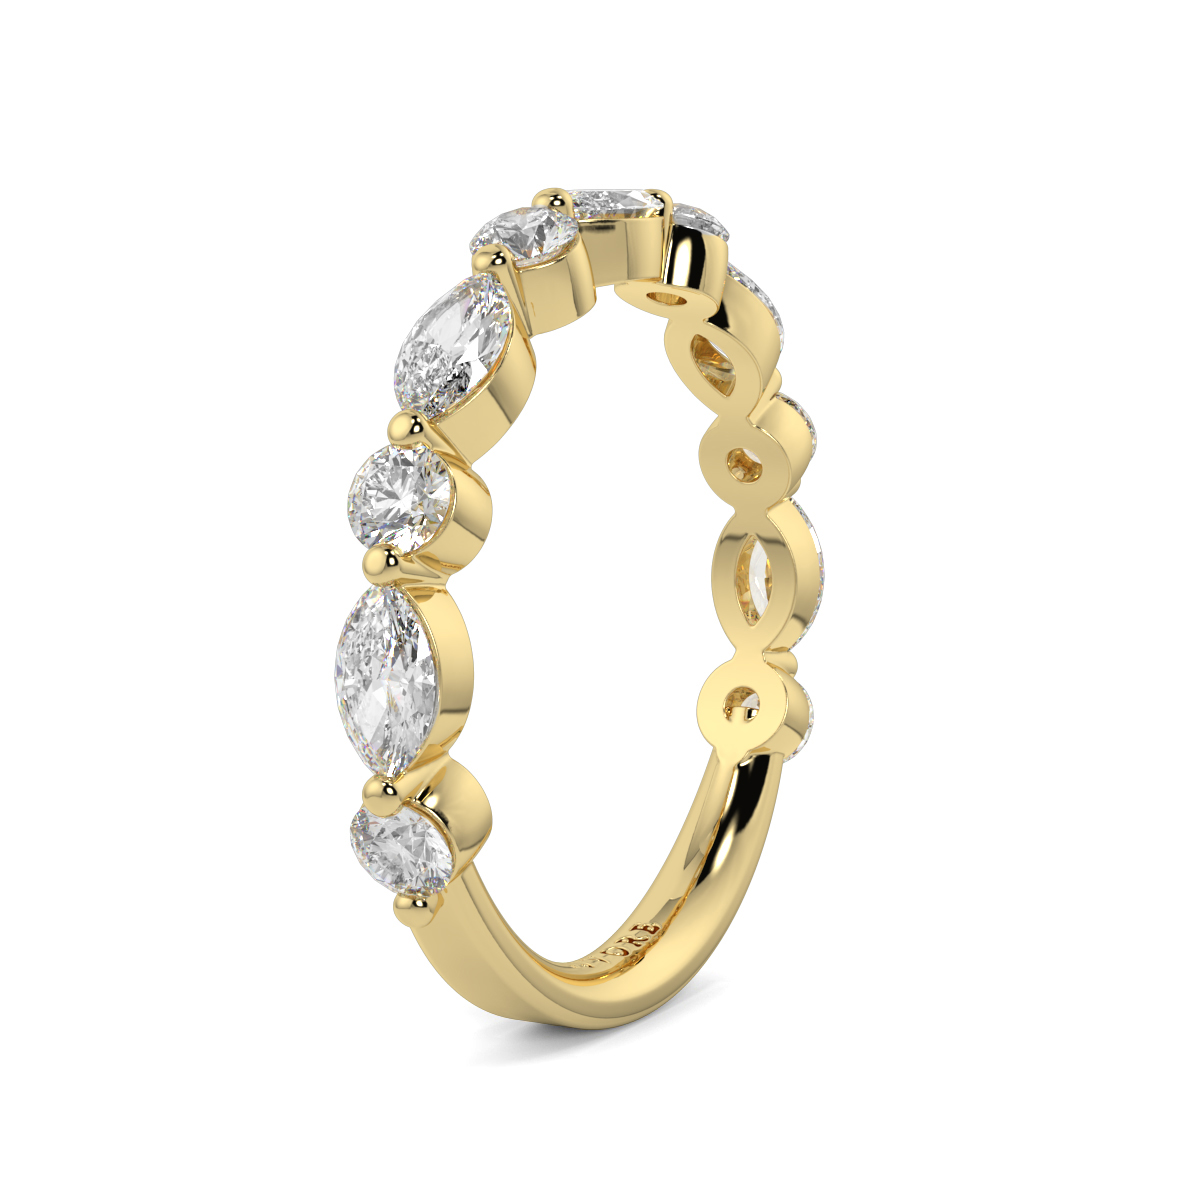 Maquise and Round Stone Eternity Ring